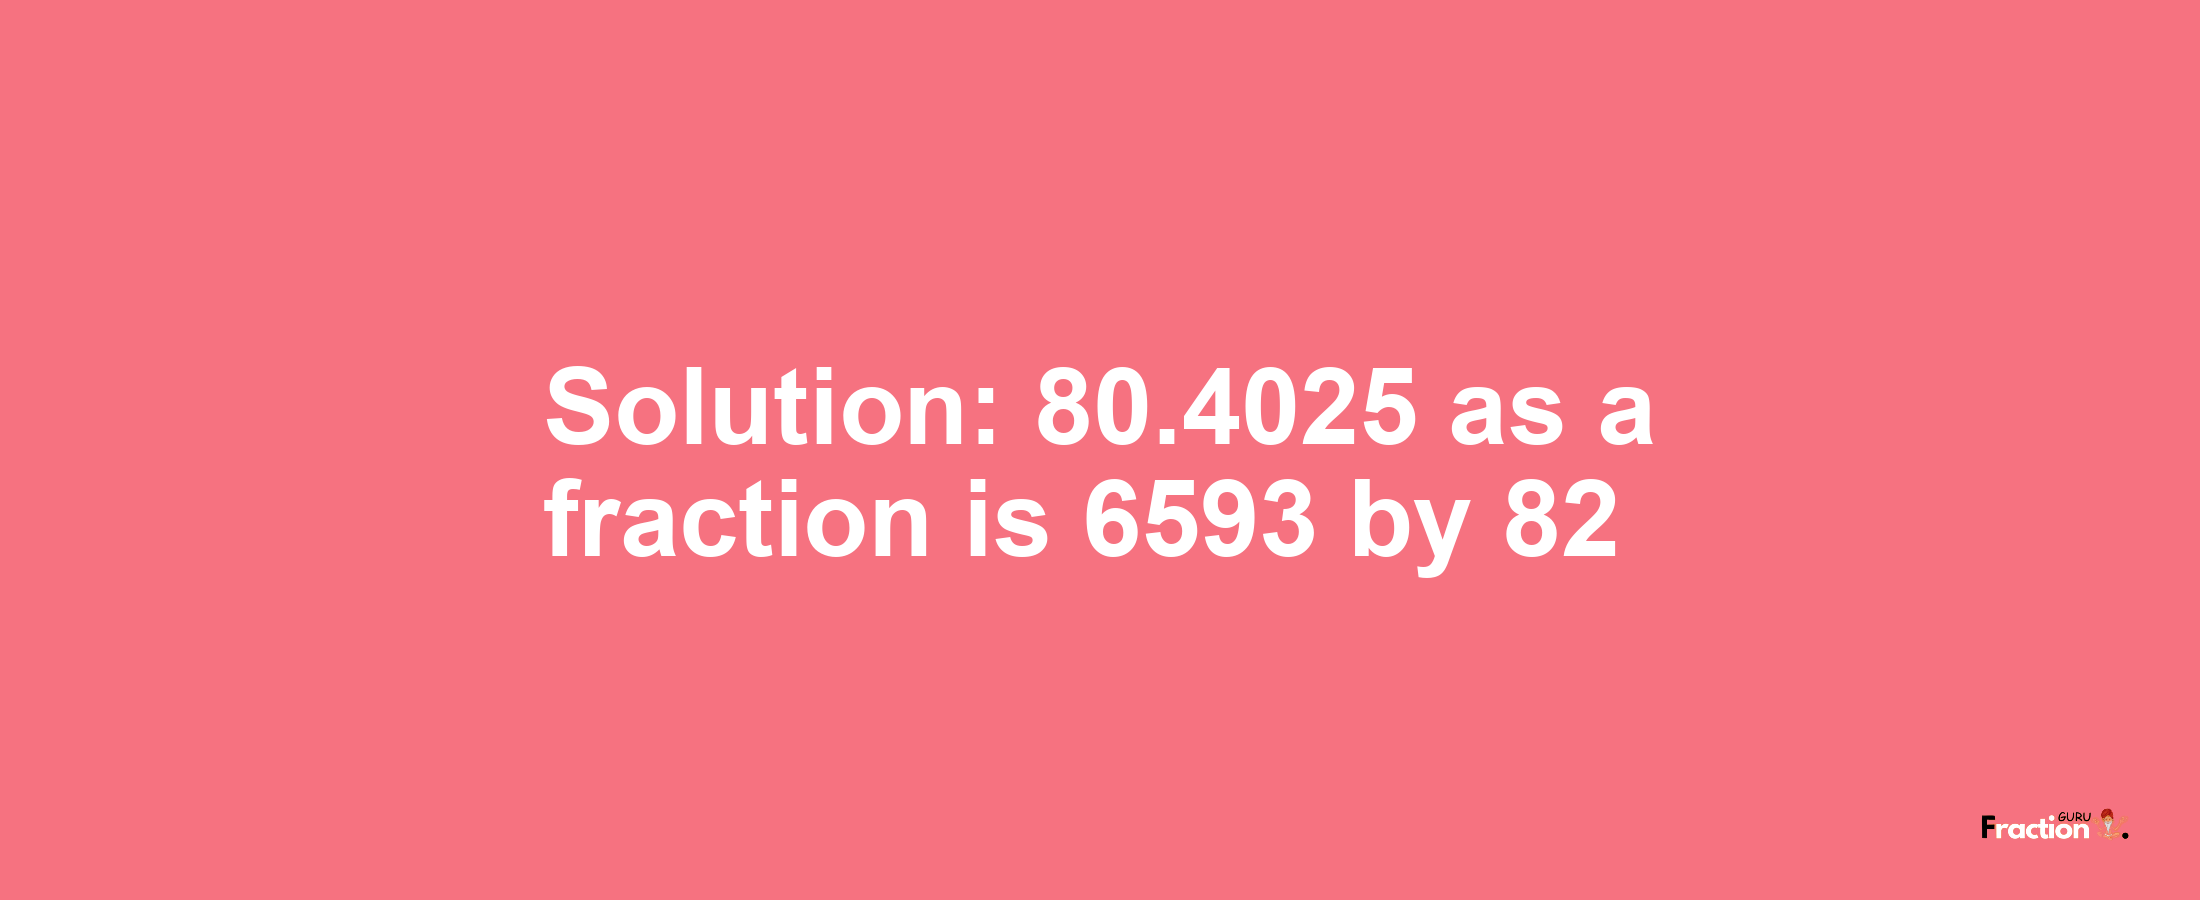 Solution:80.4025 as a fraction is 6593/82